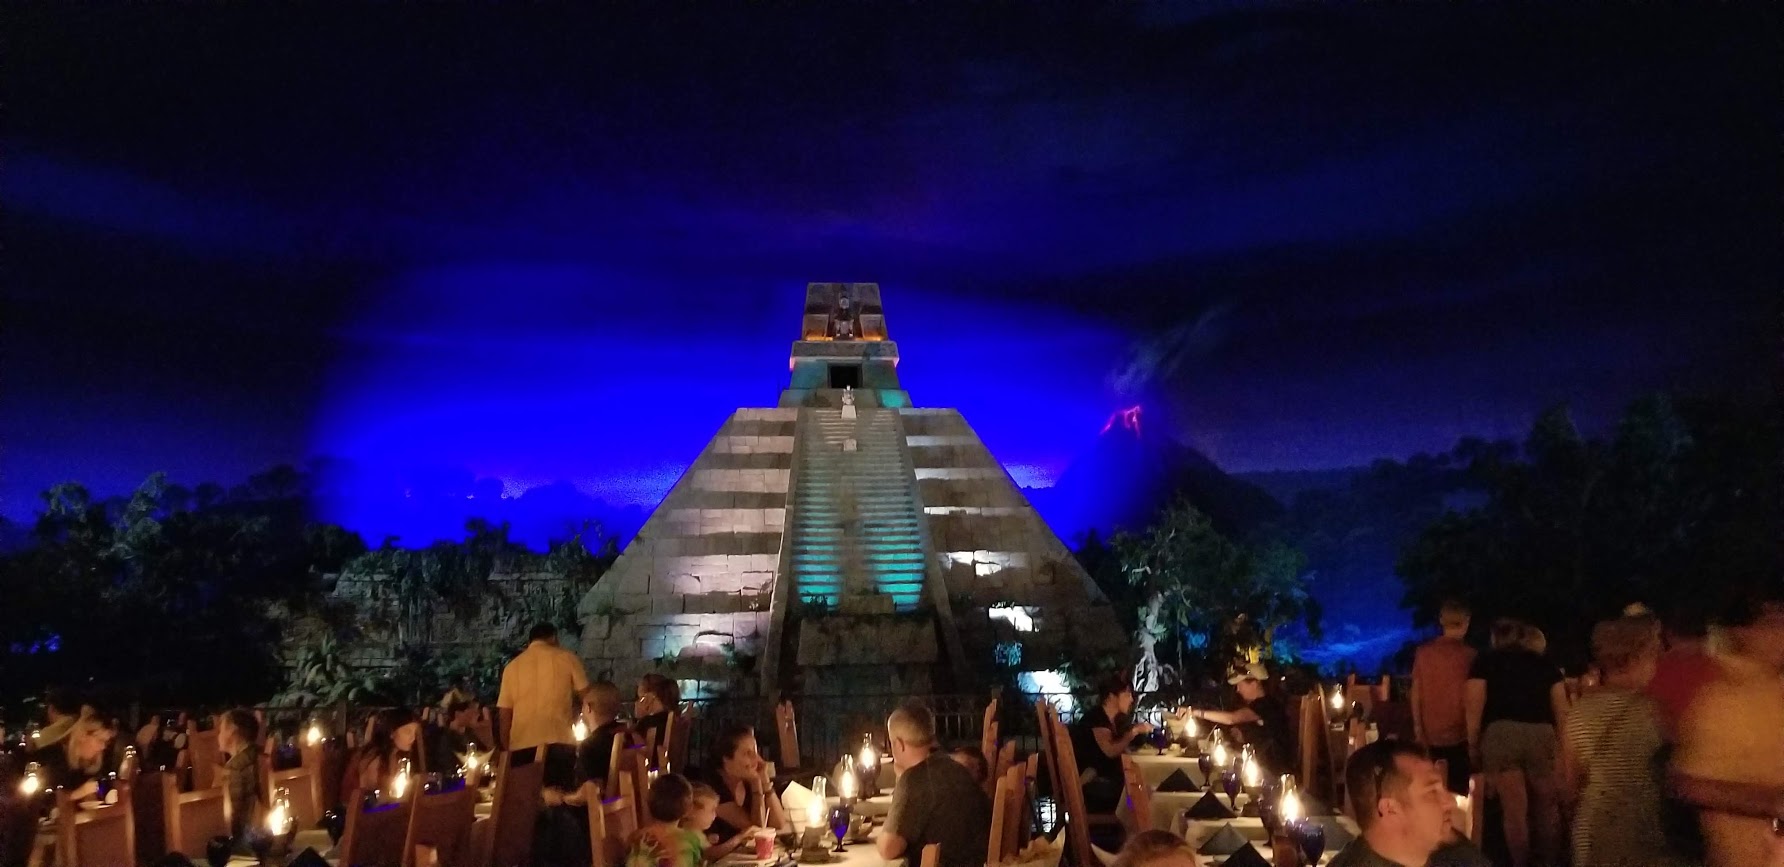 Construction to begin on the Mexico Pavilion in Epcot